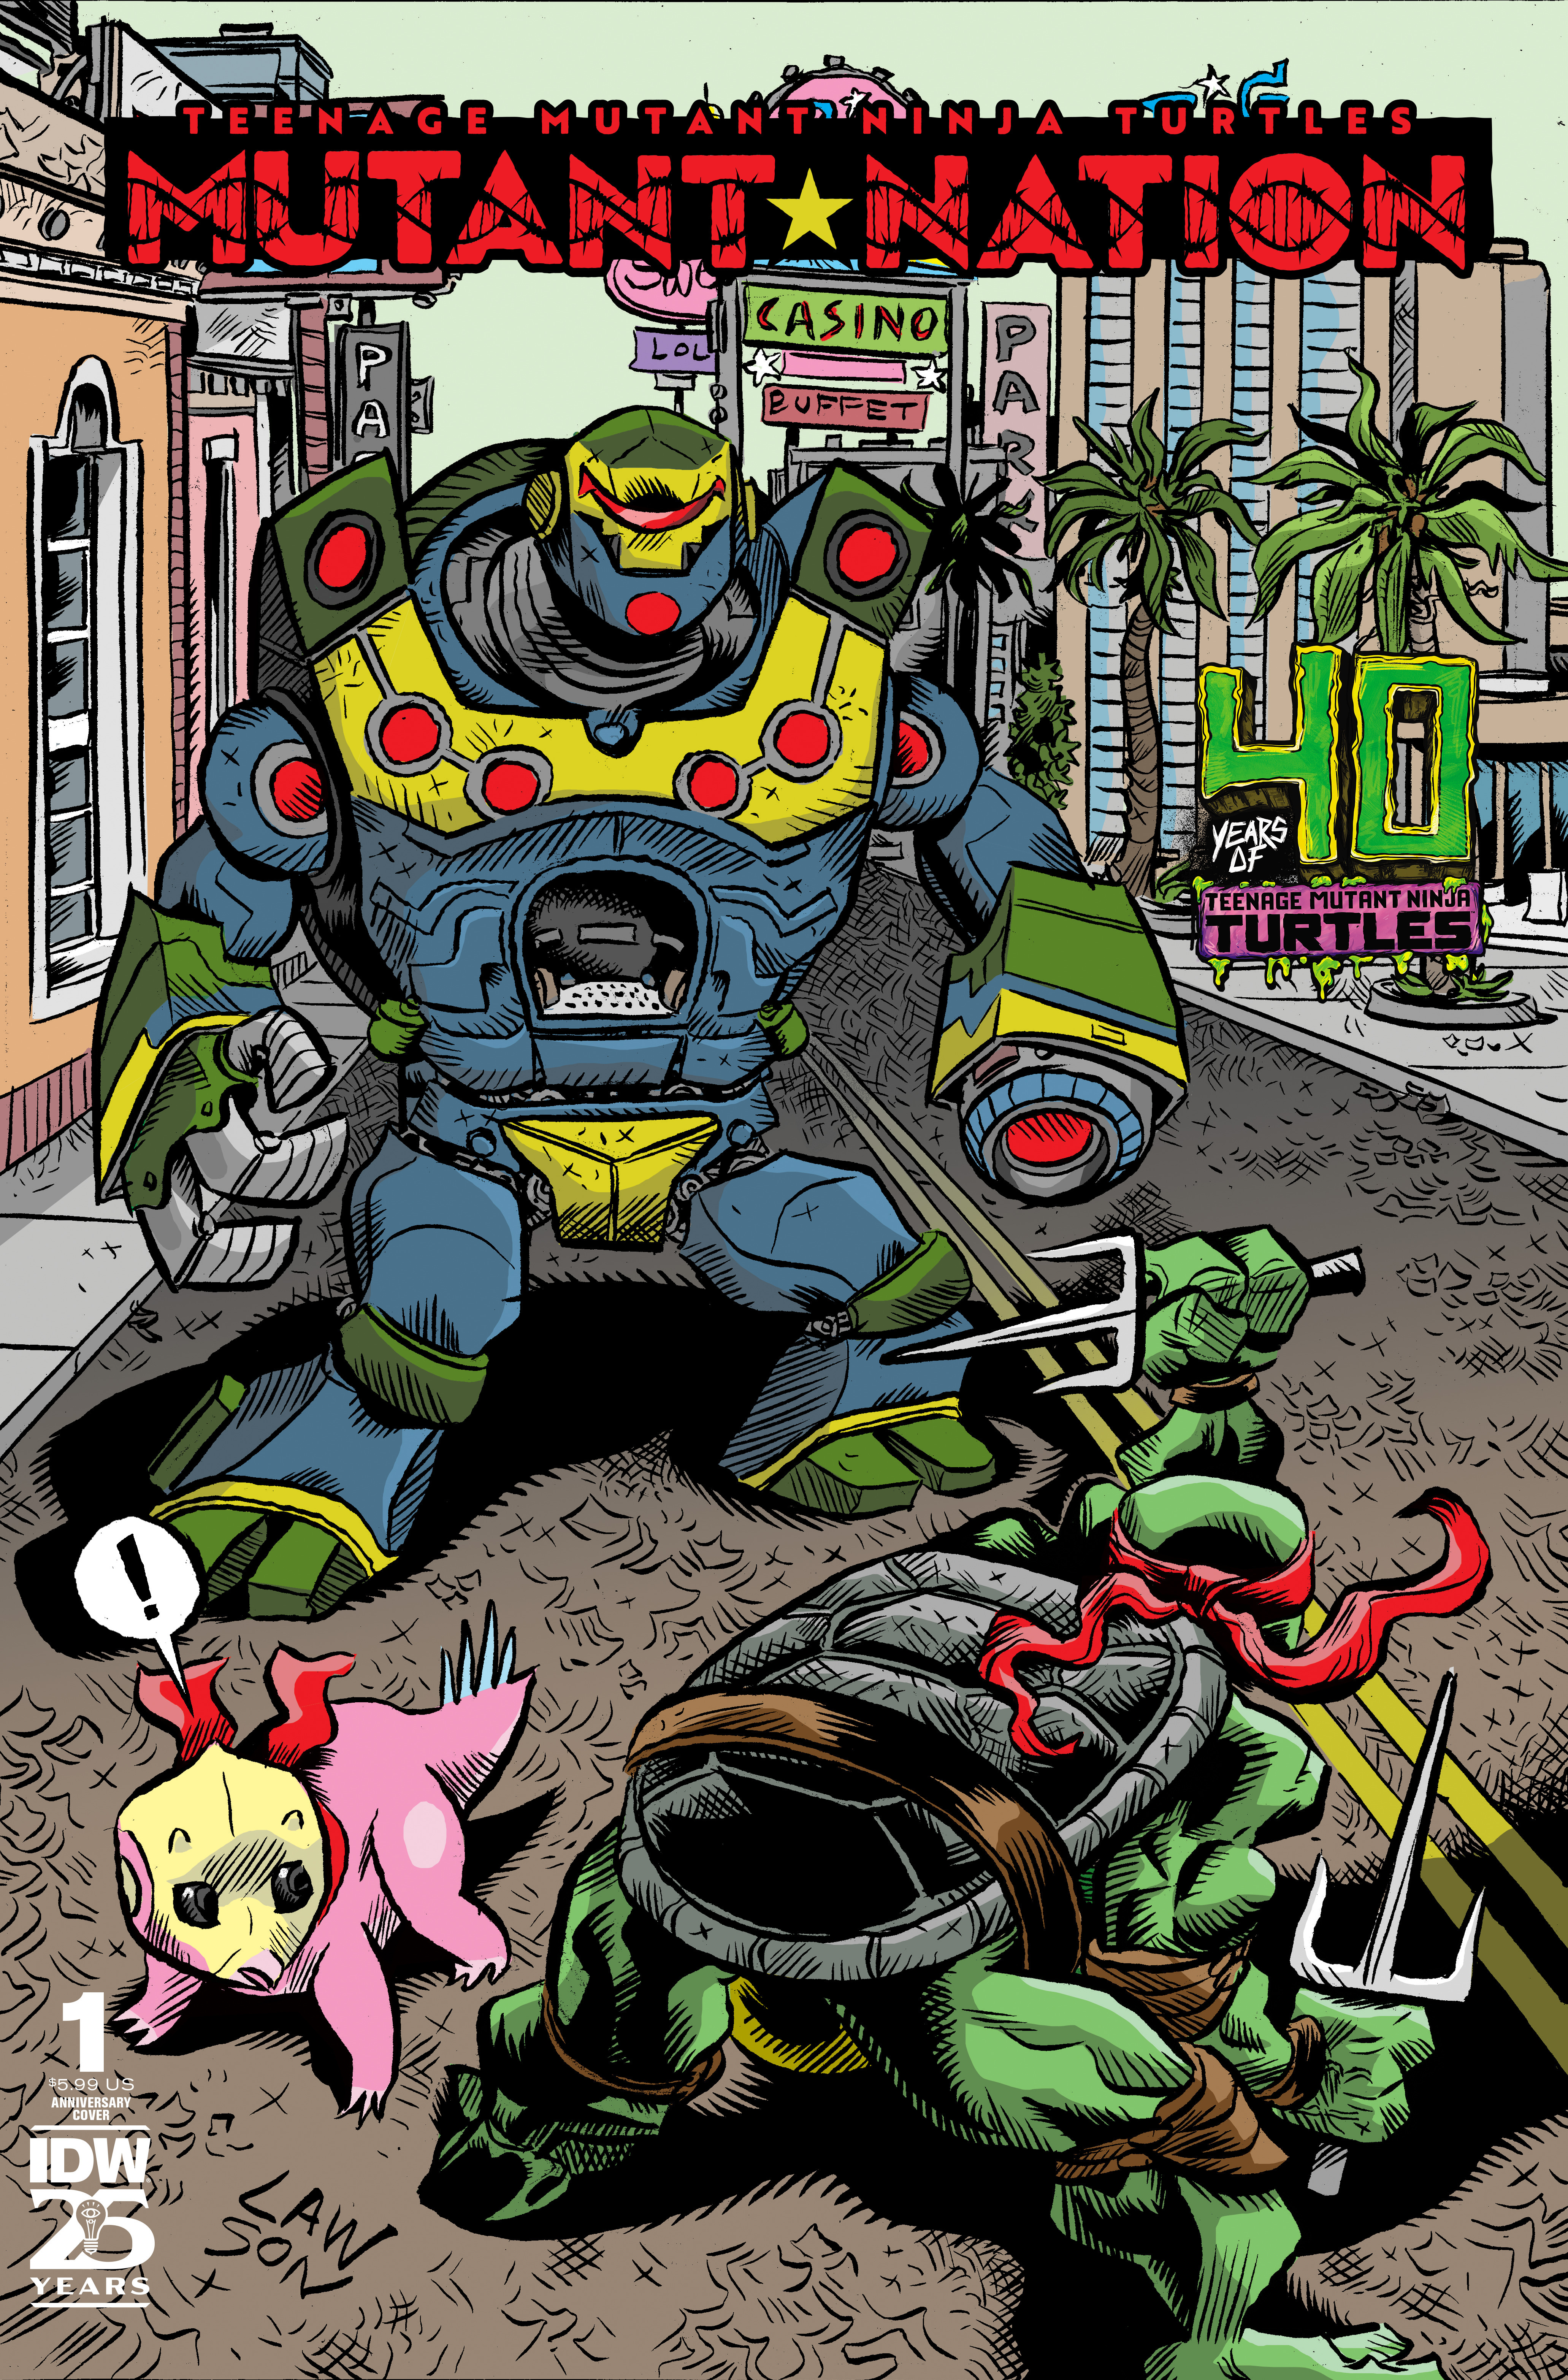 Exclusive TMNT: Mutant Nation #1 Covers & Release Information good for TMNT